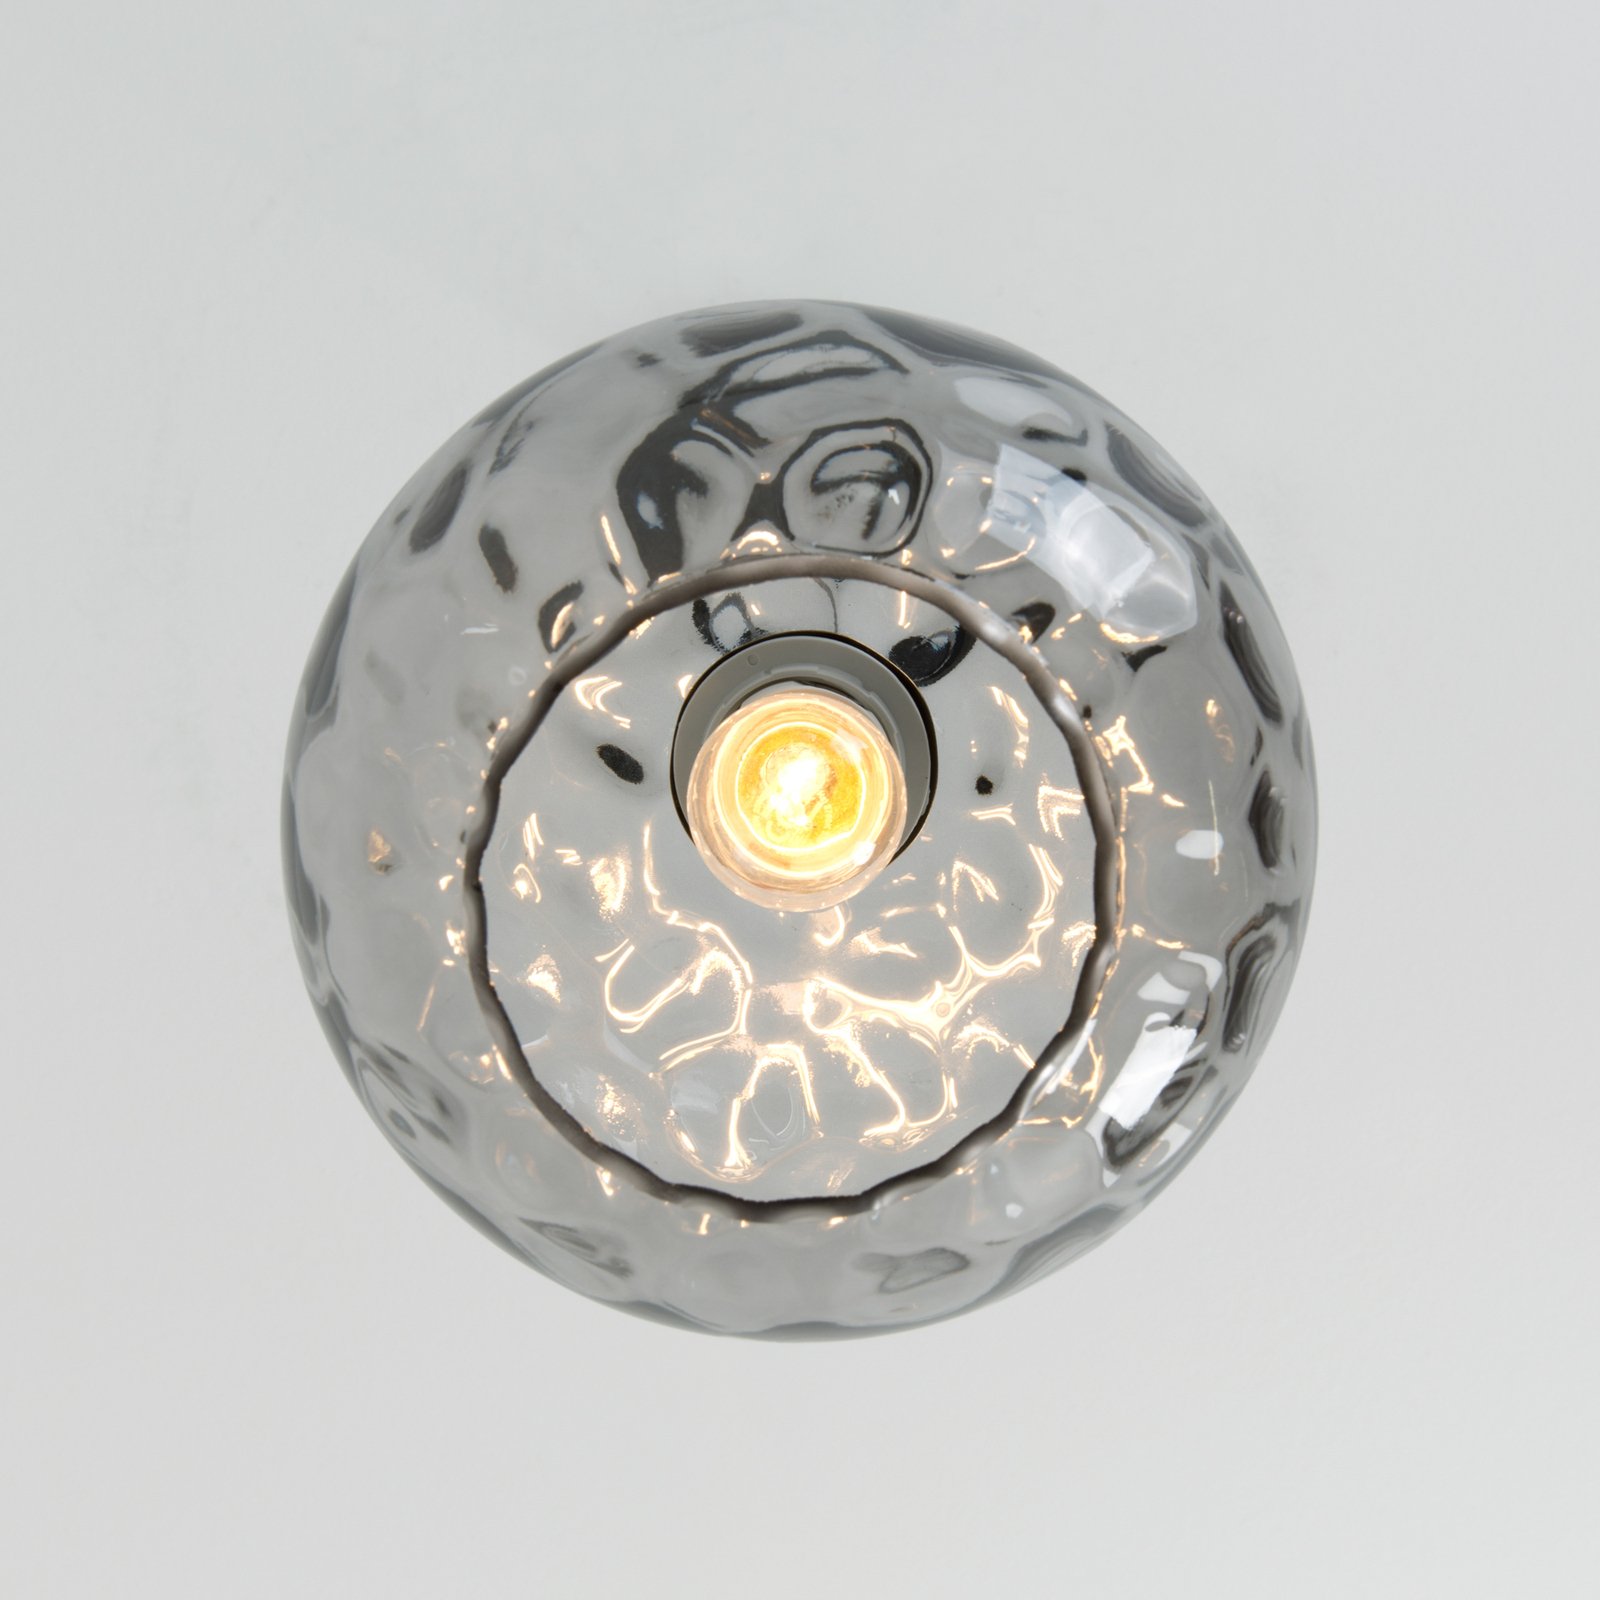 Milano pendant light with smoked glass lampshade